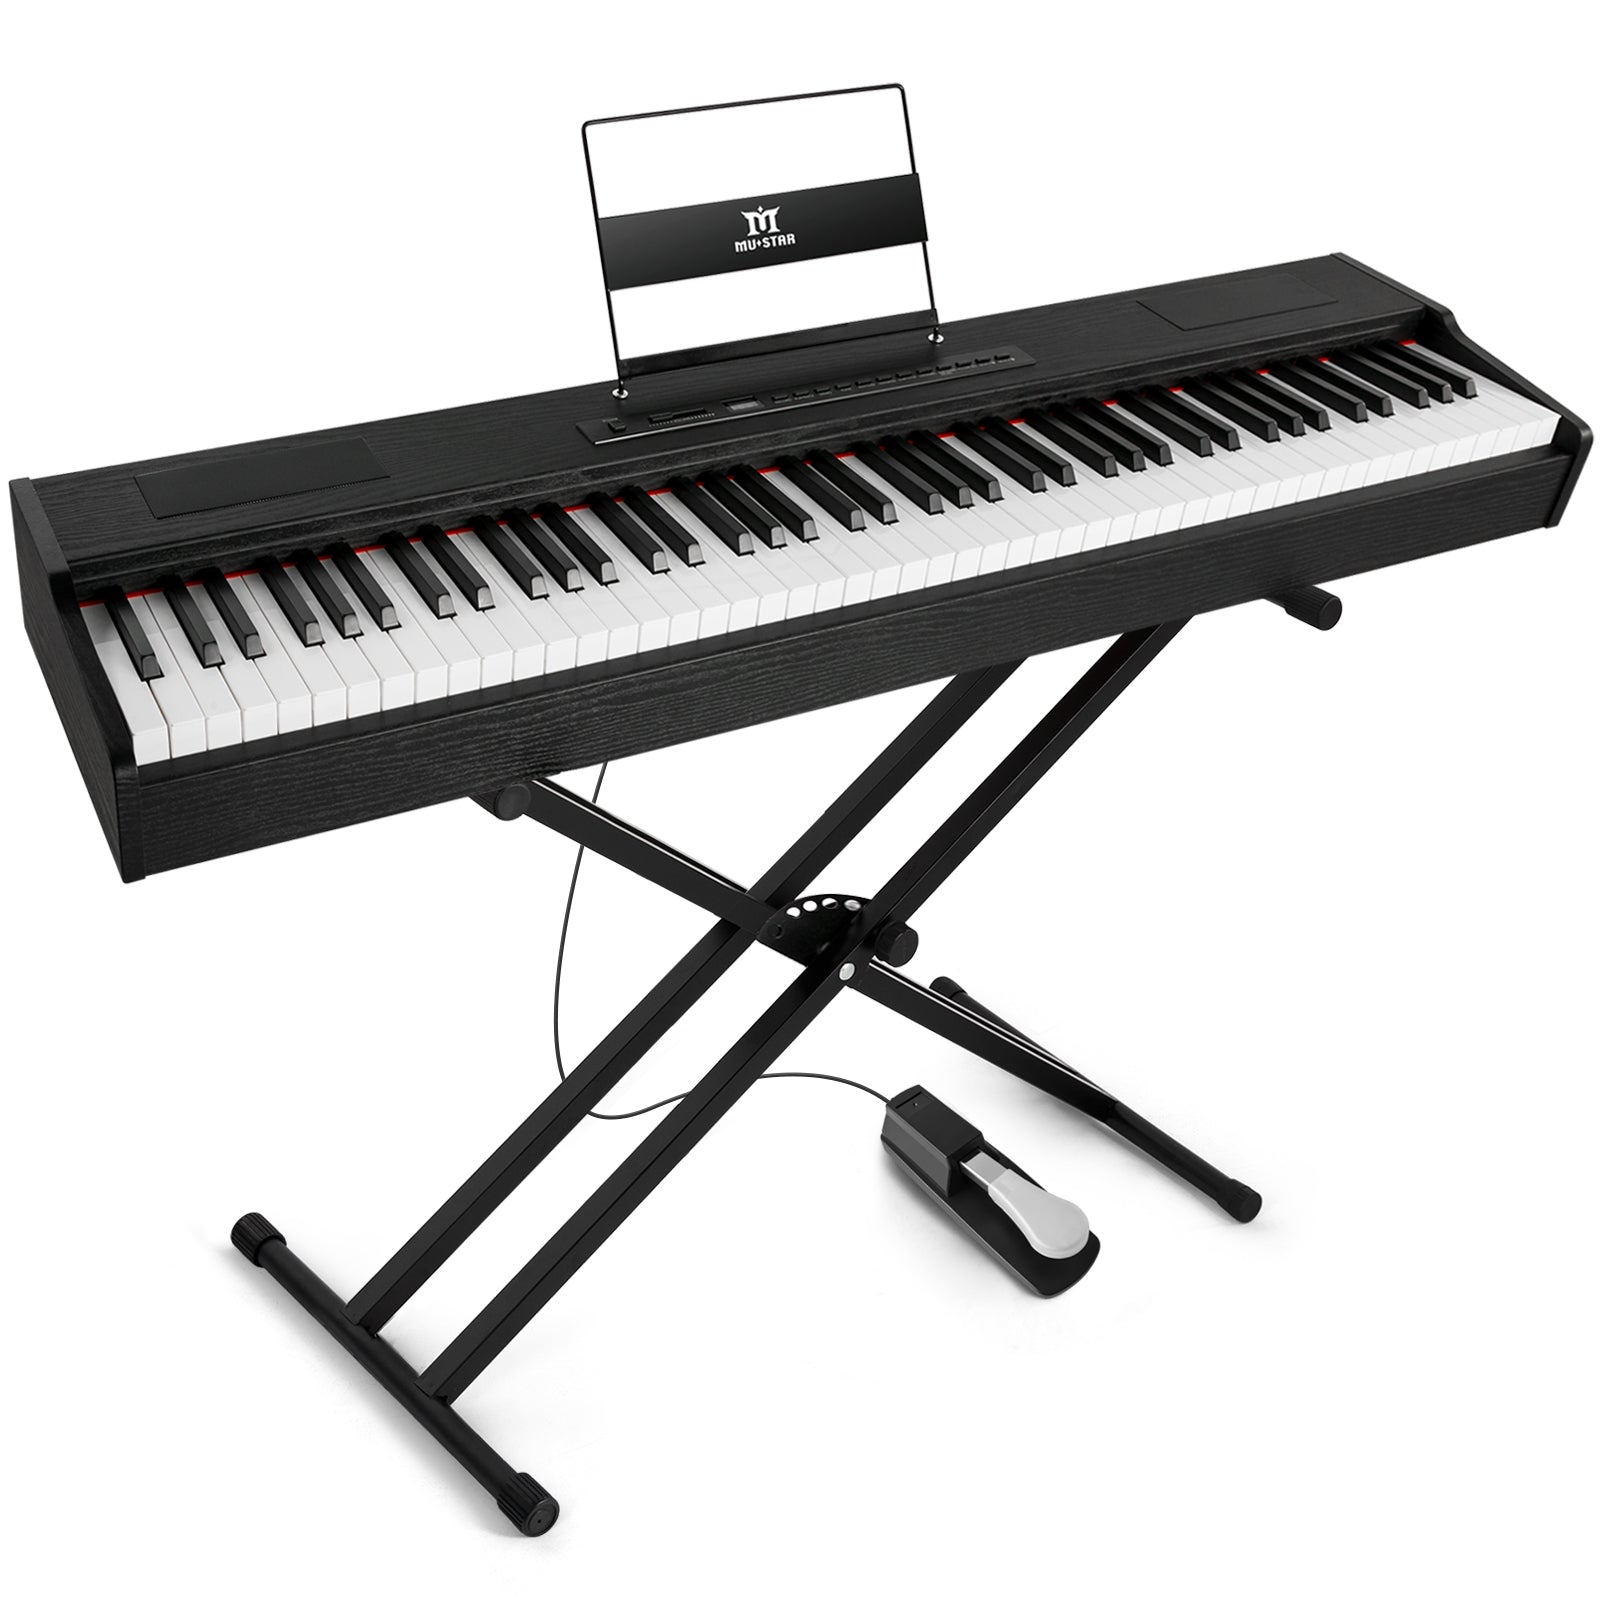 Donner DEP-10 Beginner Digital Piano, 88 Key Full-Size Semi-Weighted  Keyboard, Portable Electric Piano with Sustain Pedal, Power Supply :  : Musical Instruments